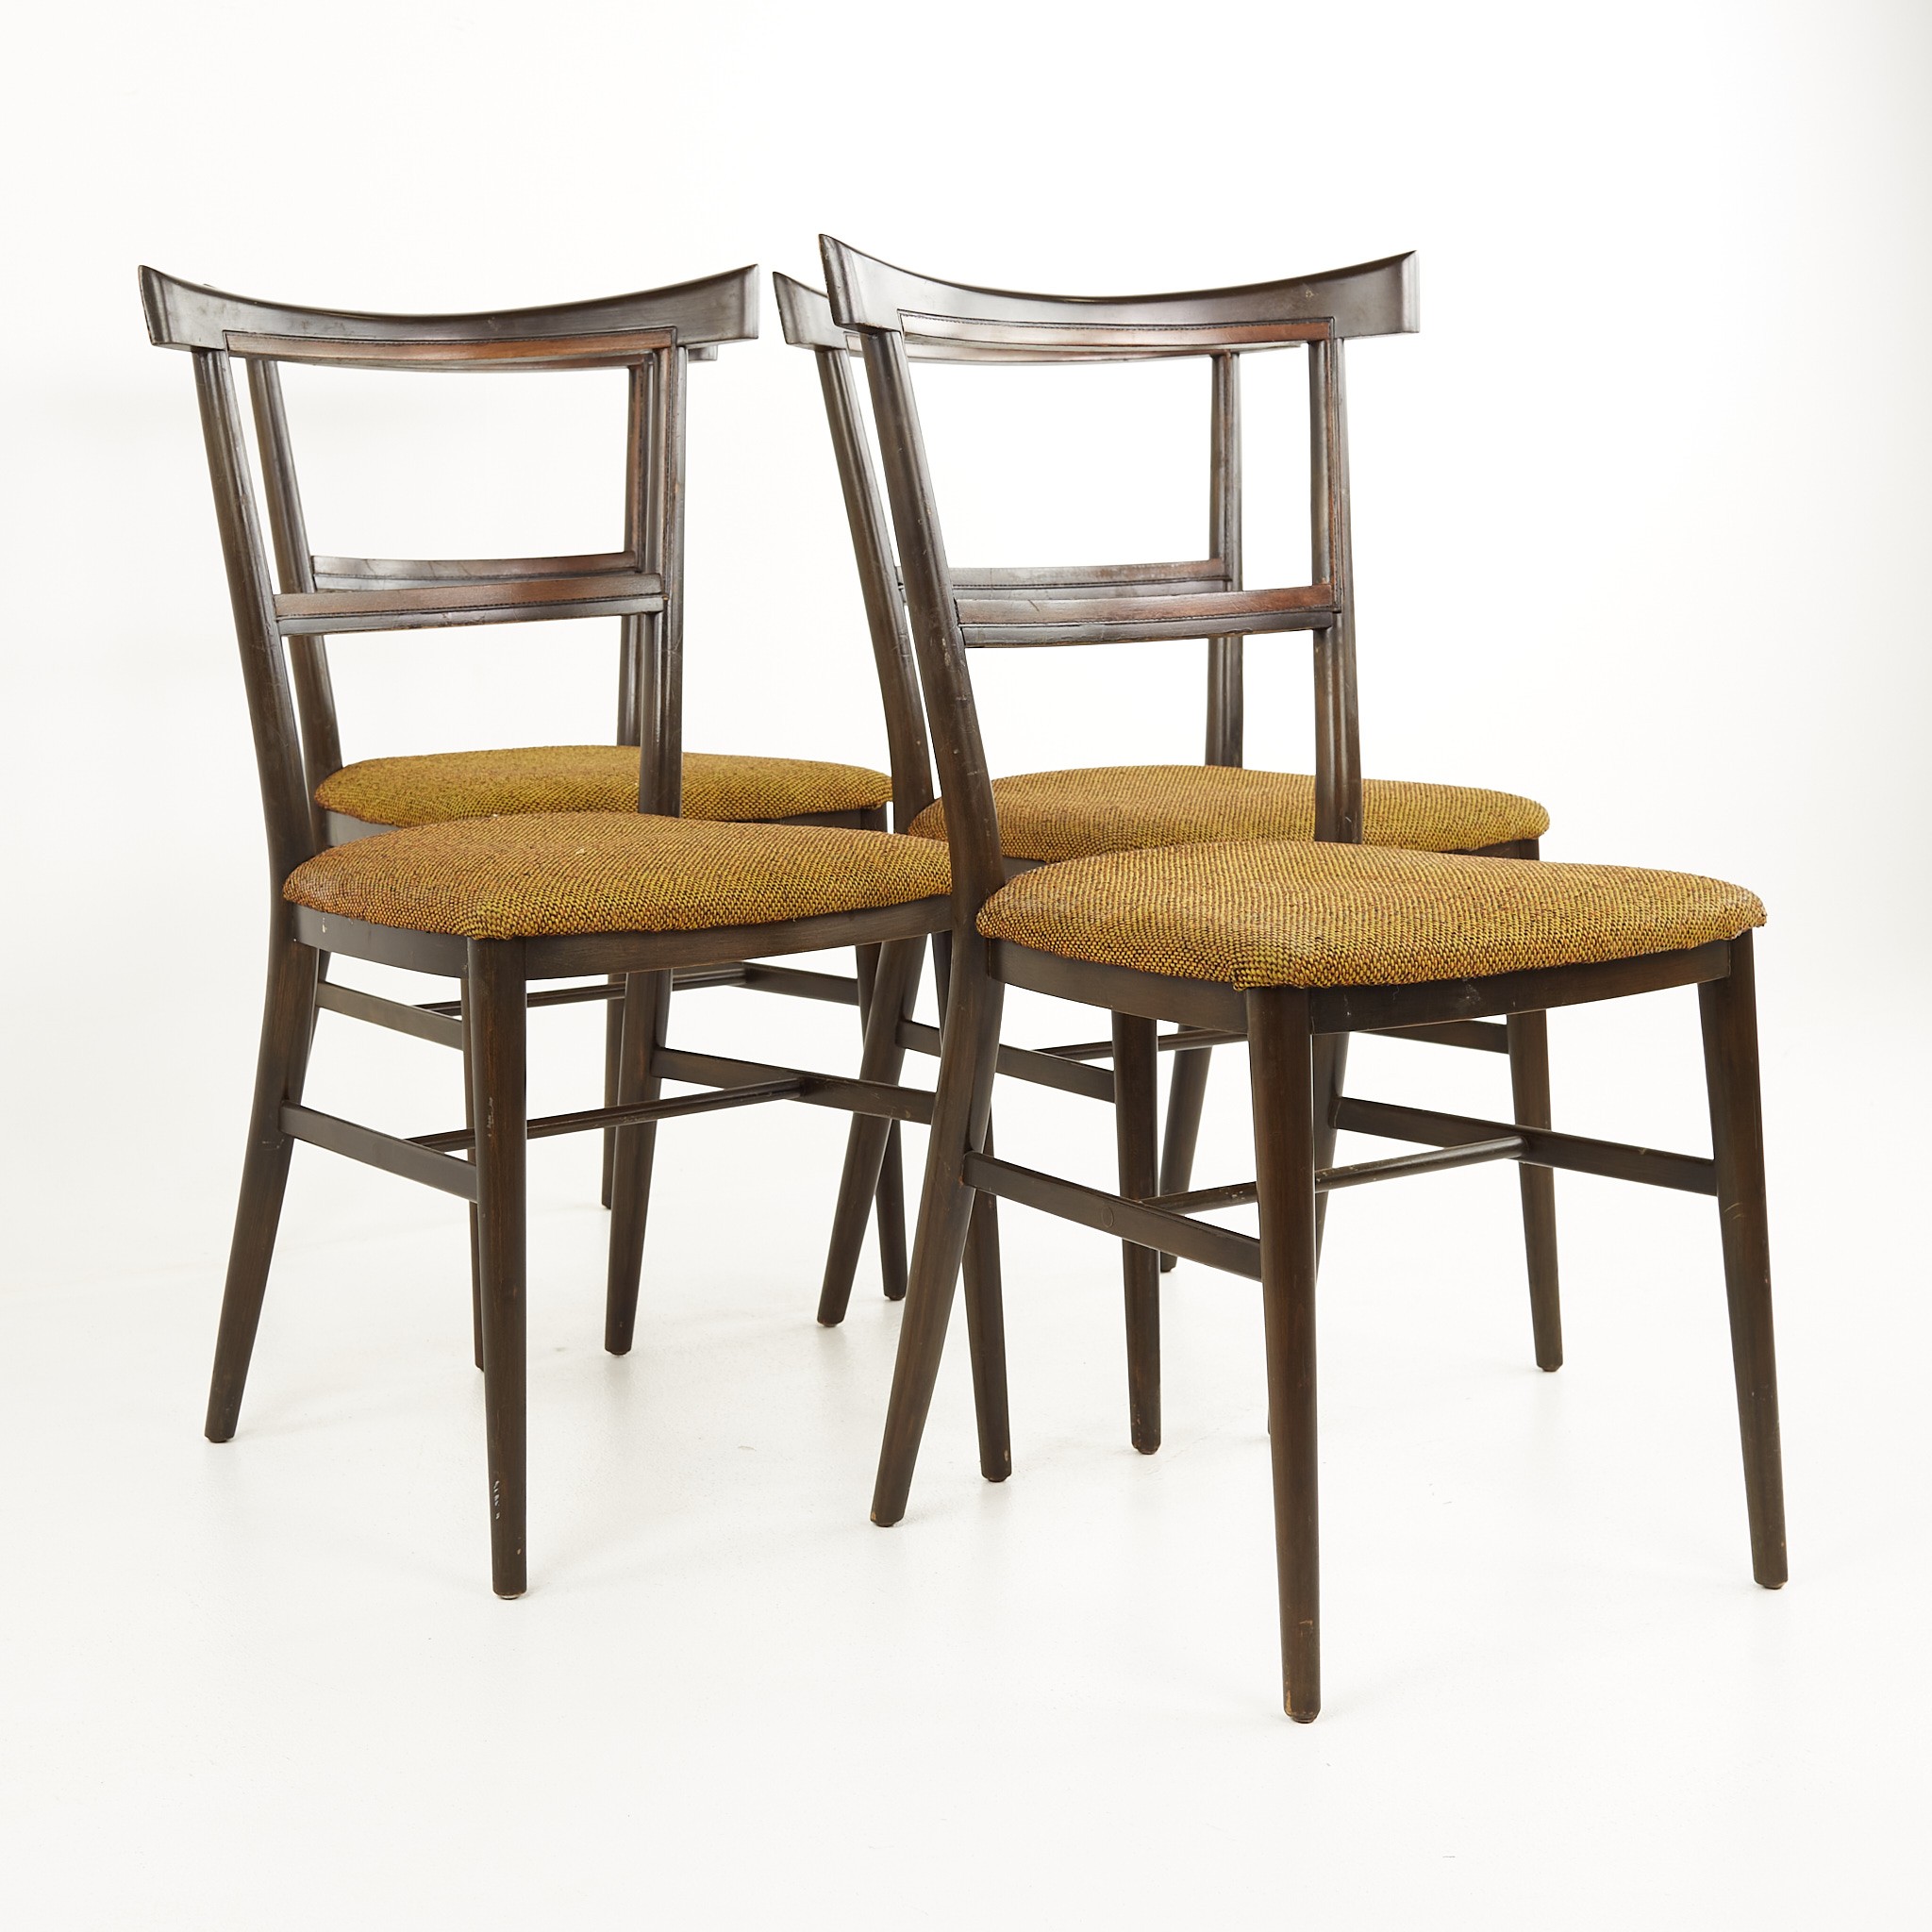 Paul Mccobb for Calvin Mid Century Maple Dining Chairs - Set of 4